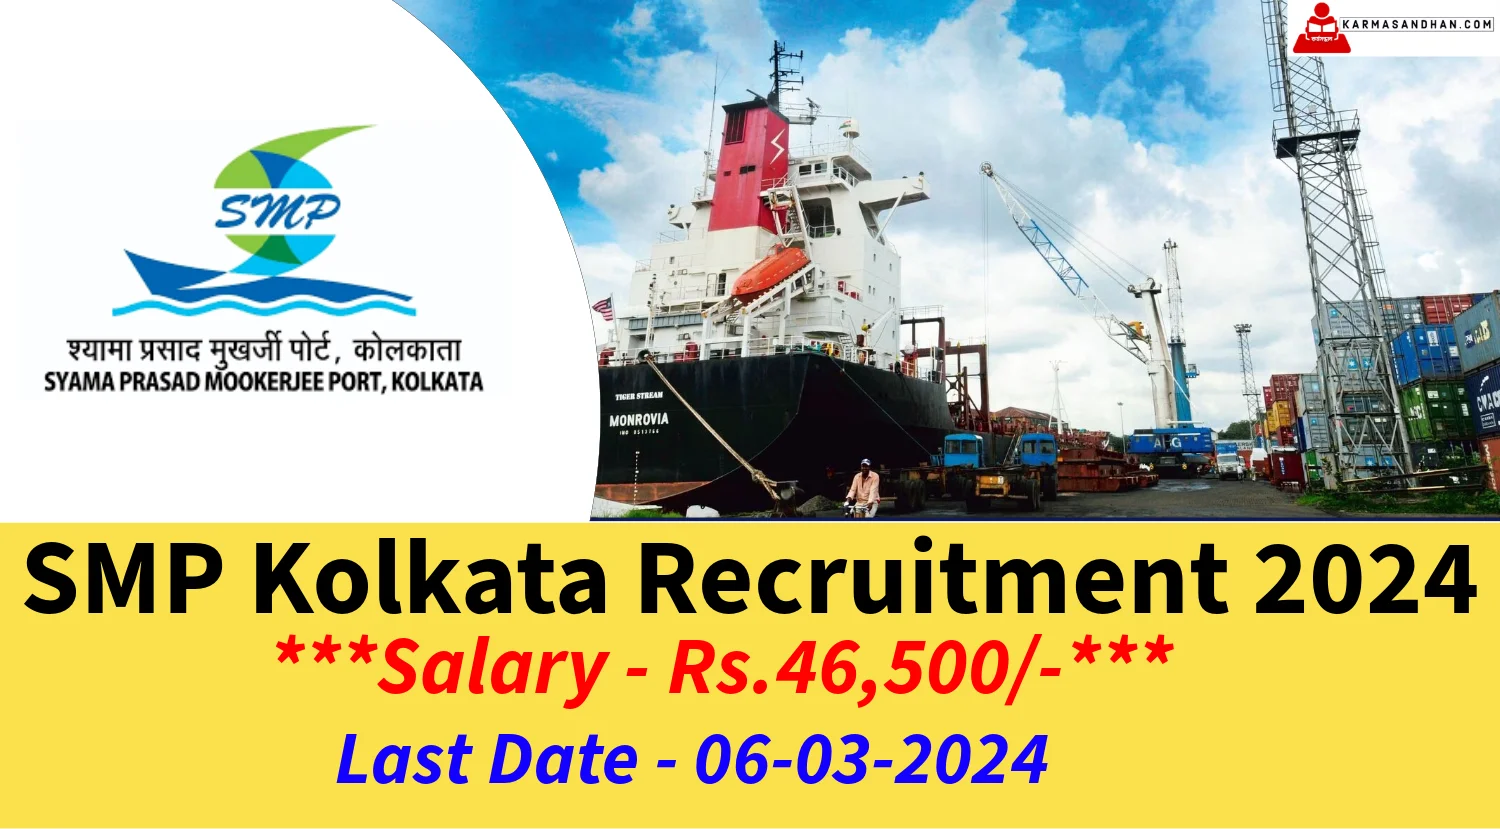 SMP Kolkata Recruitment 2024 Notification out for Marine Officer Posts